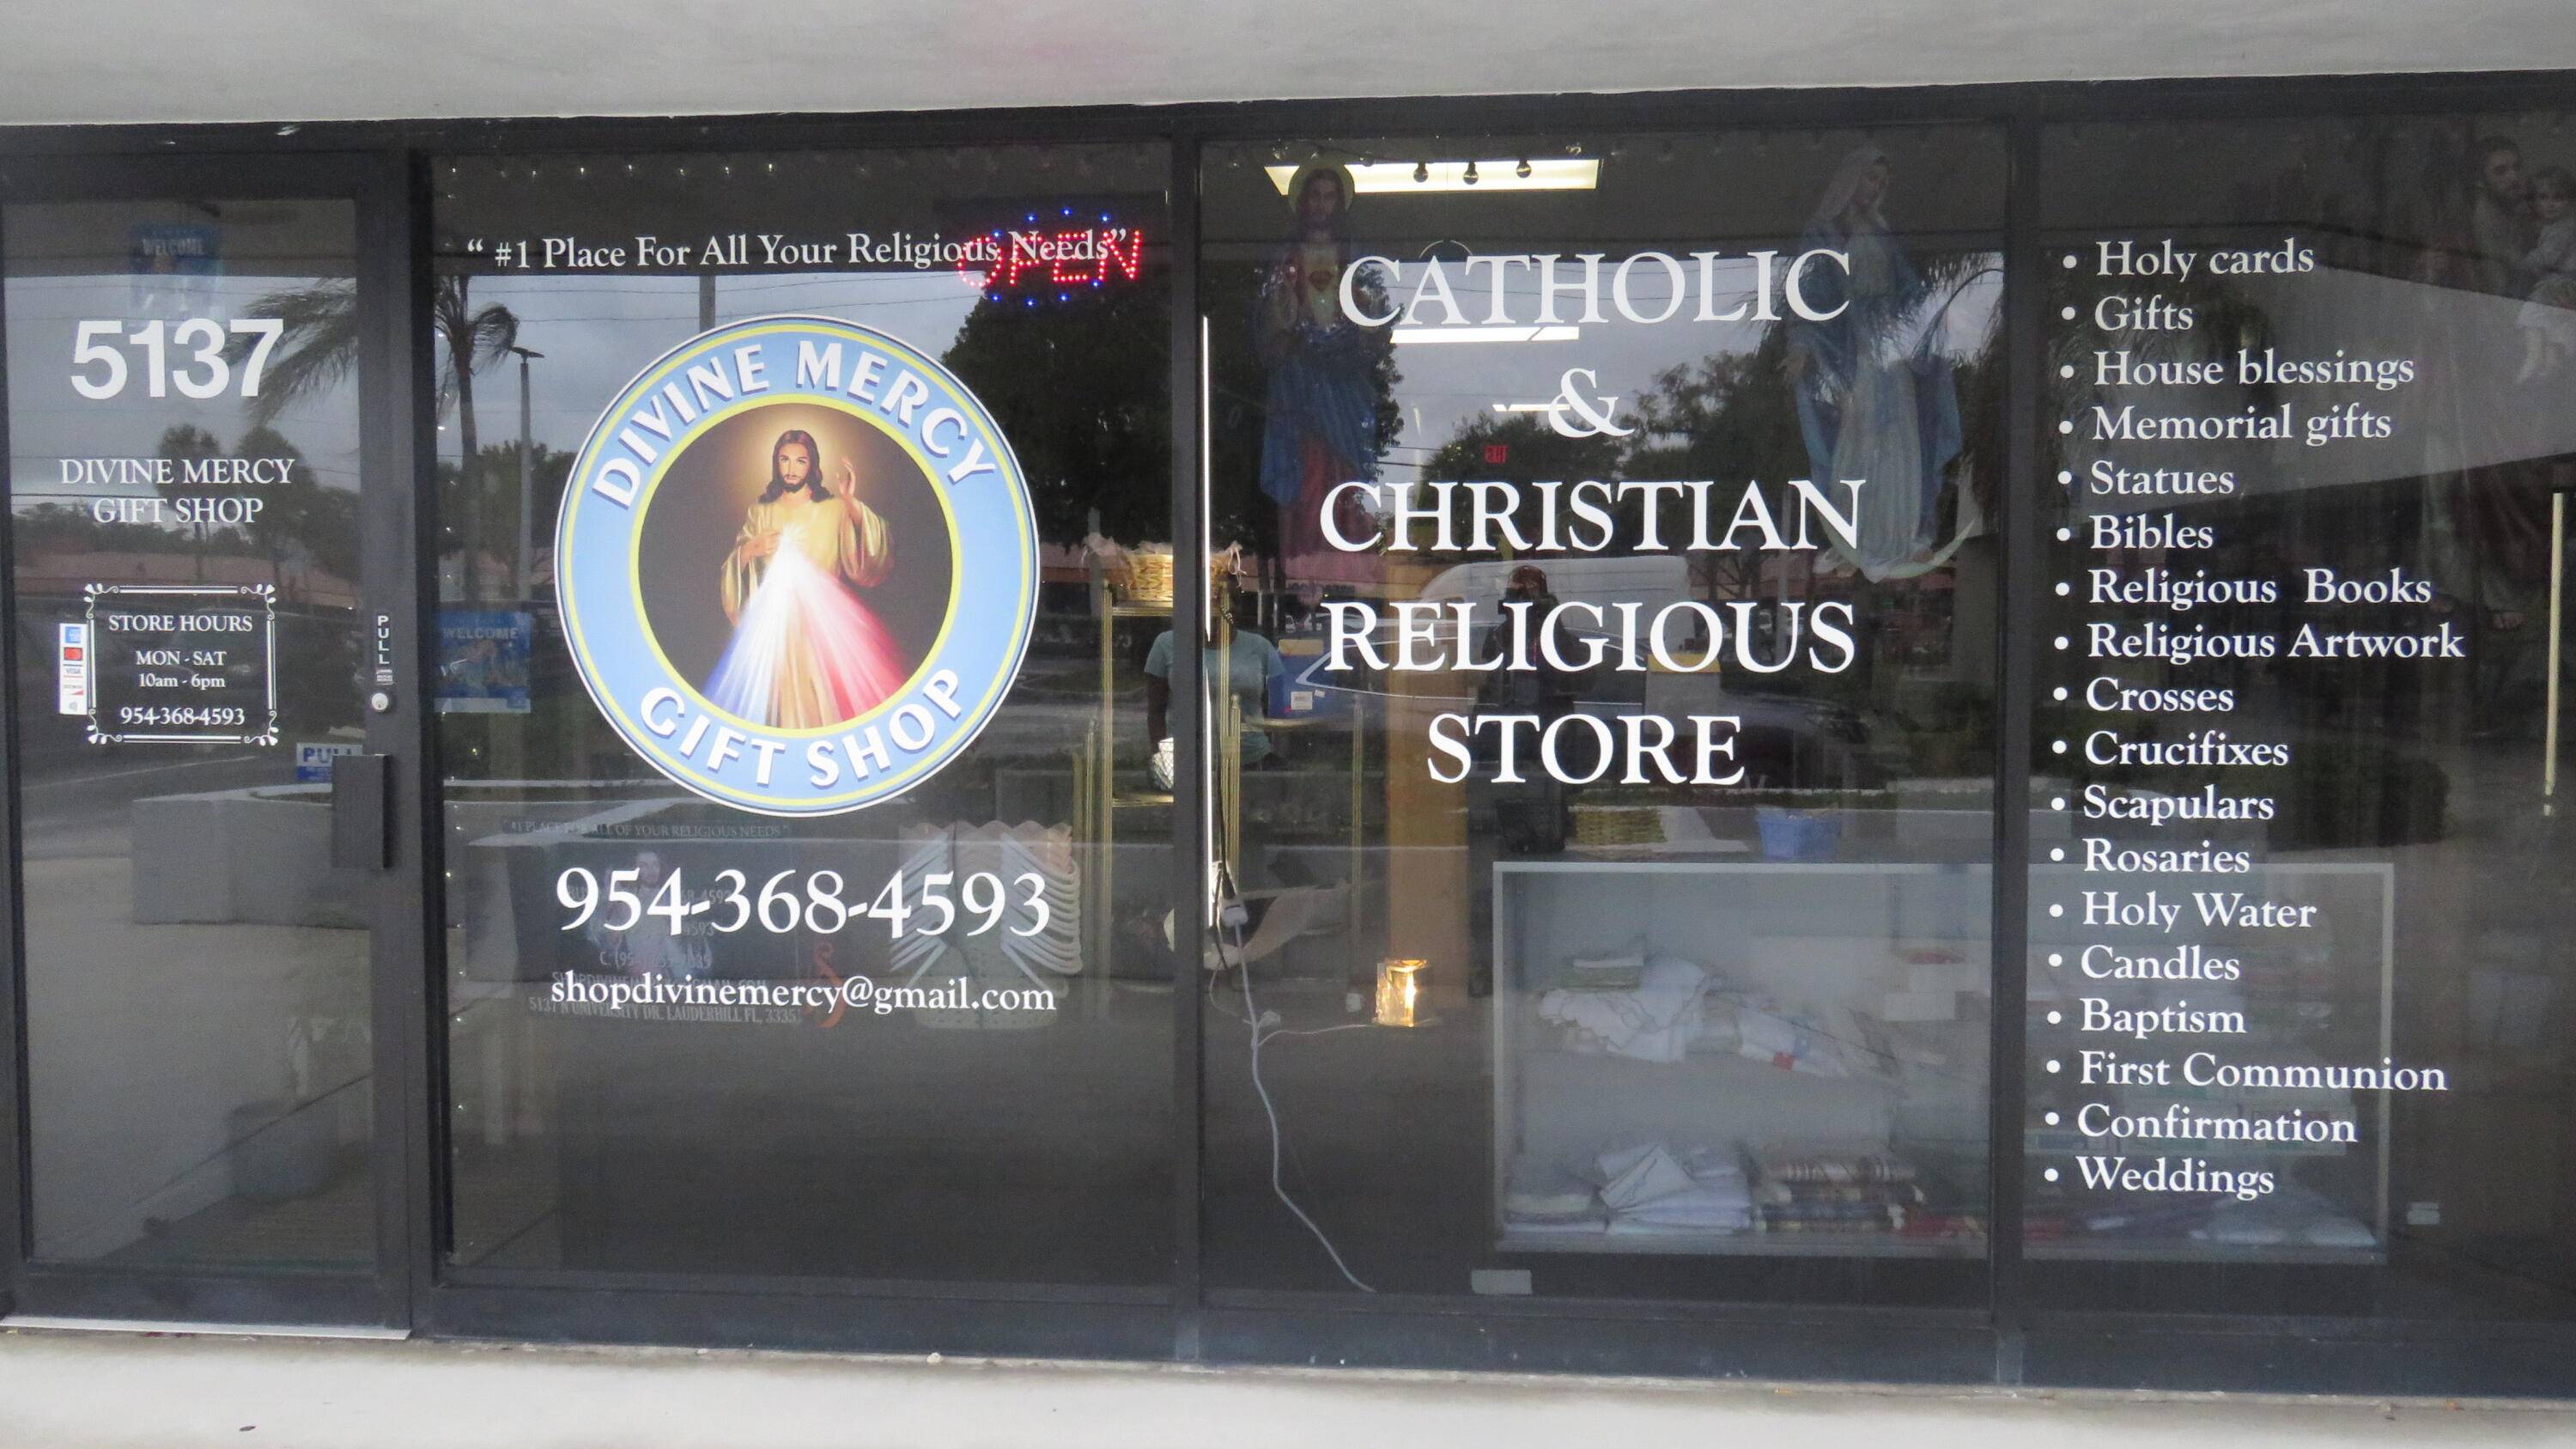 Distinguished Divine Mercy Gift Shop located in the hard of Lauderhill is currently on the market.